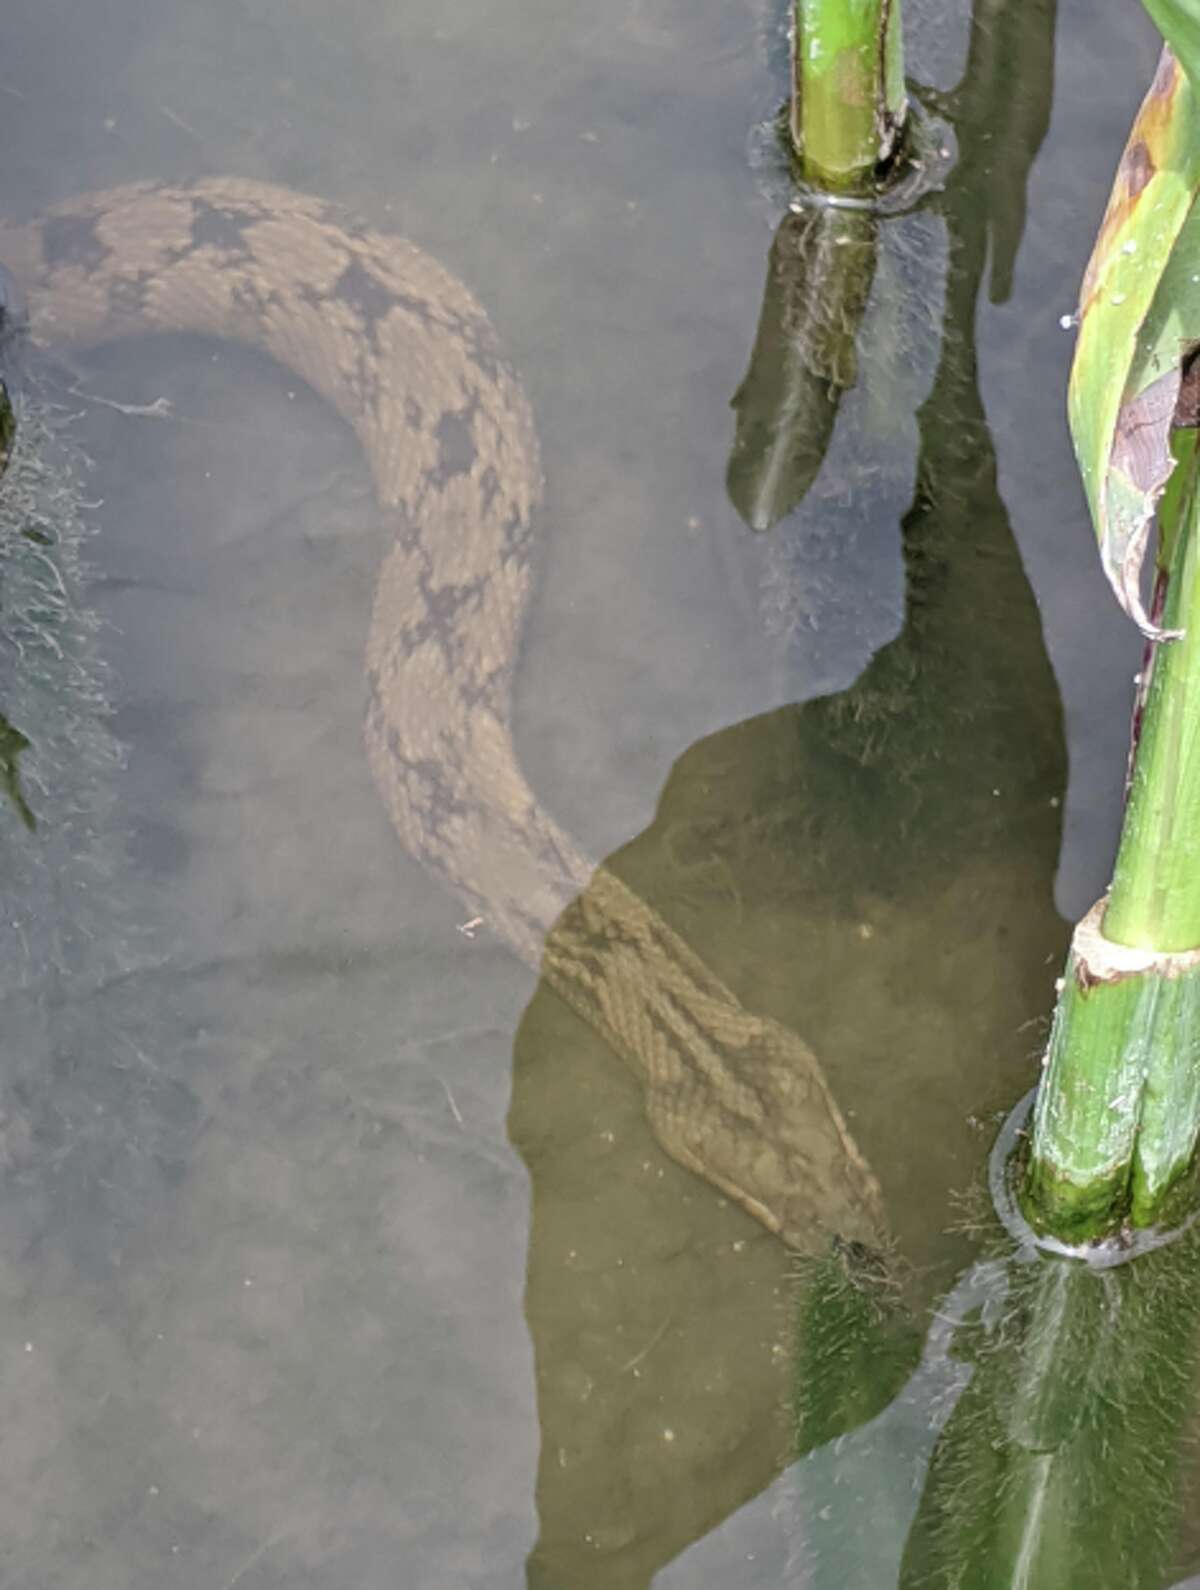 On Sunday, Thomas Sinard, a new San Antonian who recently moved from Ohio, decided to explore the River Walk. Along the way, he found a few non-venomous snakes.